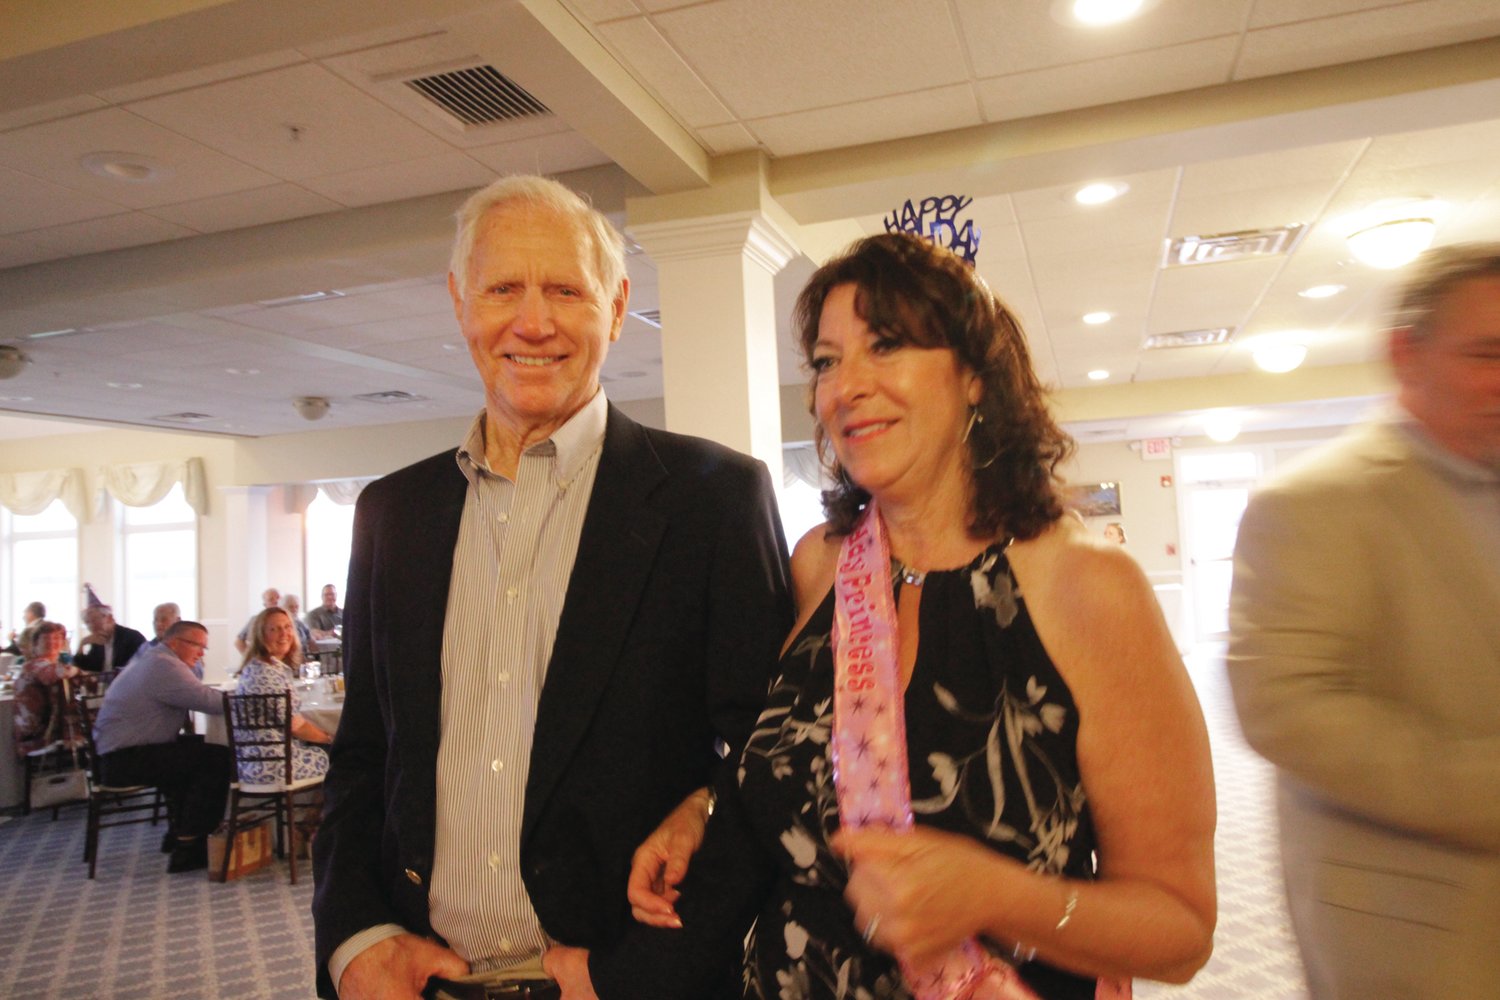 CELEBRATING BIRTHDAYS: Bill Riggs and his daughter-in-law Karen, who were given a joint surprise birthday party Saturday at Warwick Country Club. (Warwick Beacon photo)